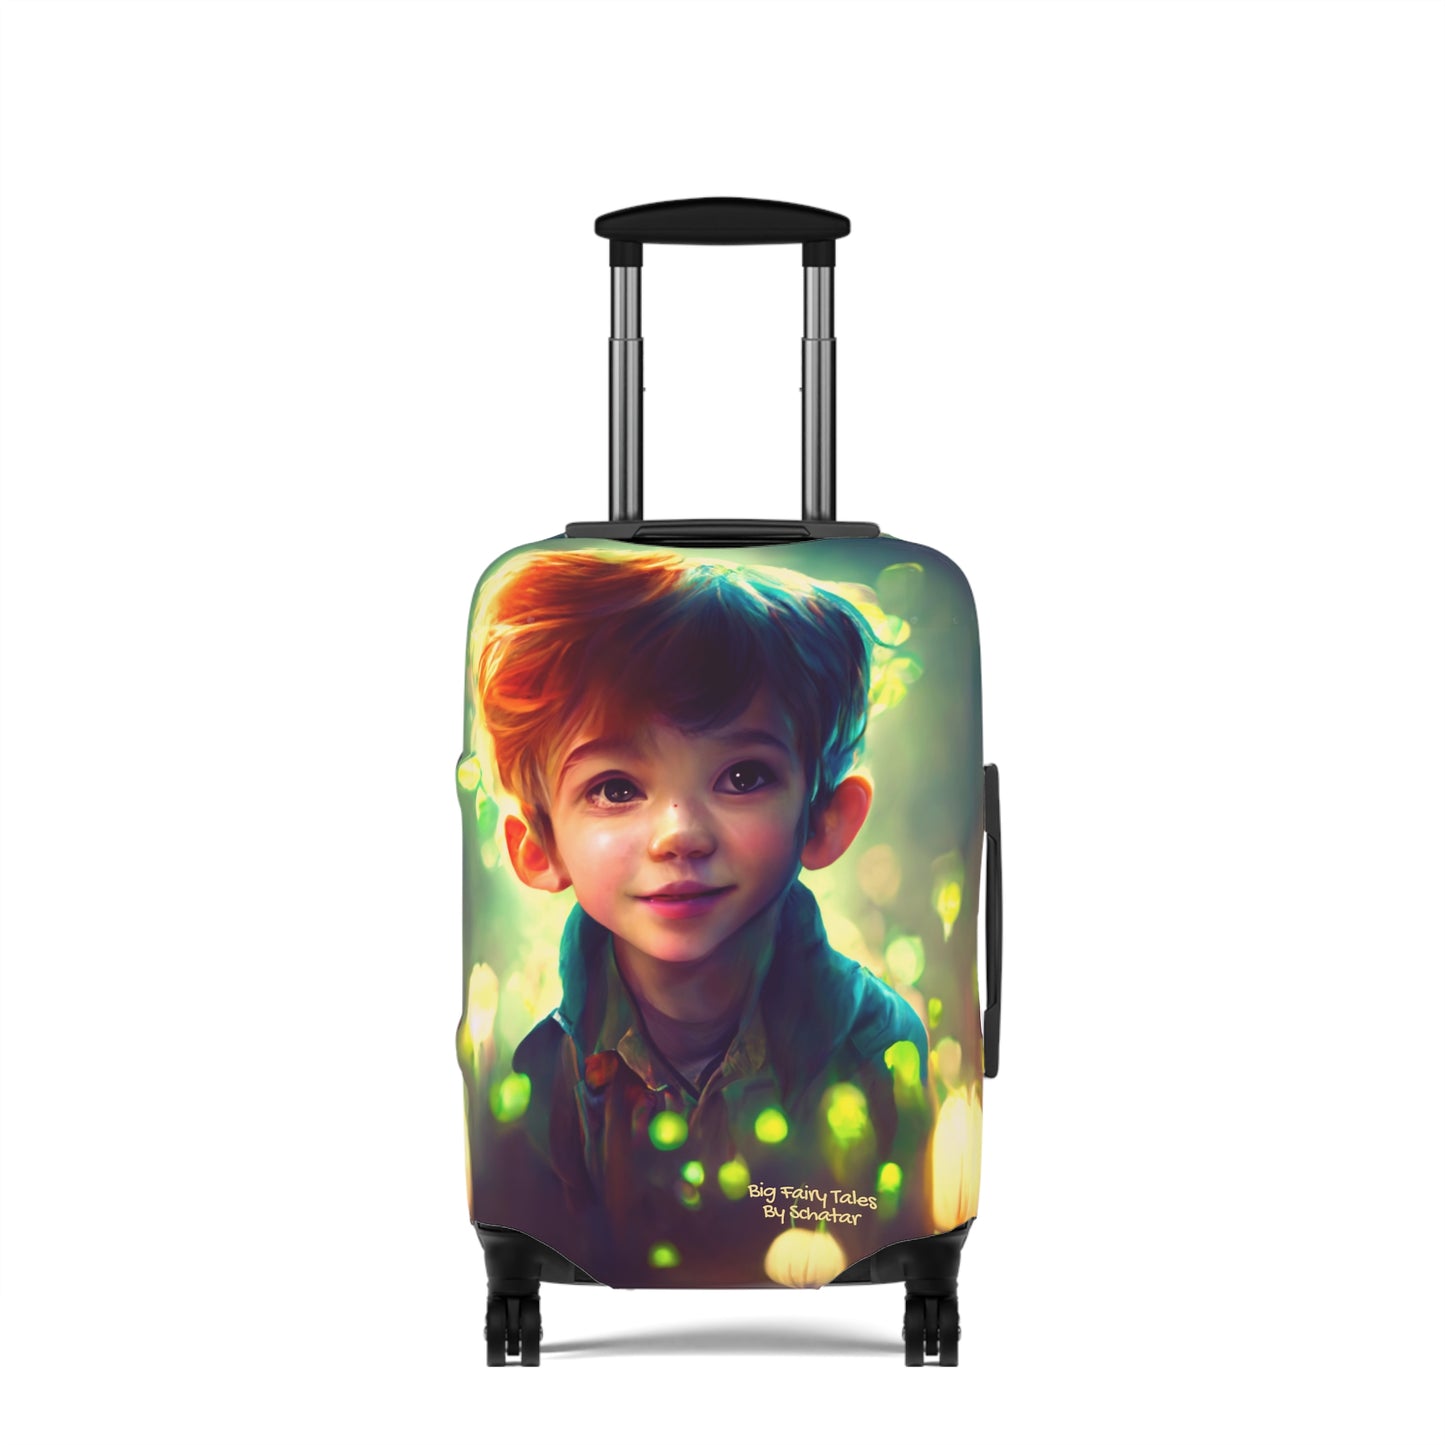 Big Fairy Tales By Schatar Tom Thumb Luggage Cover